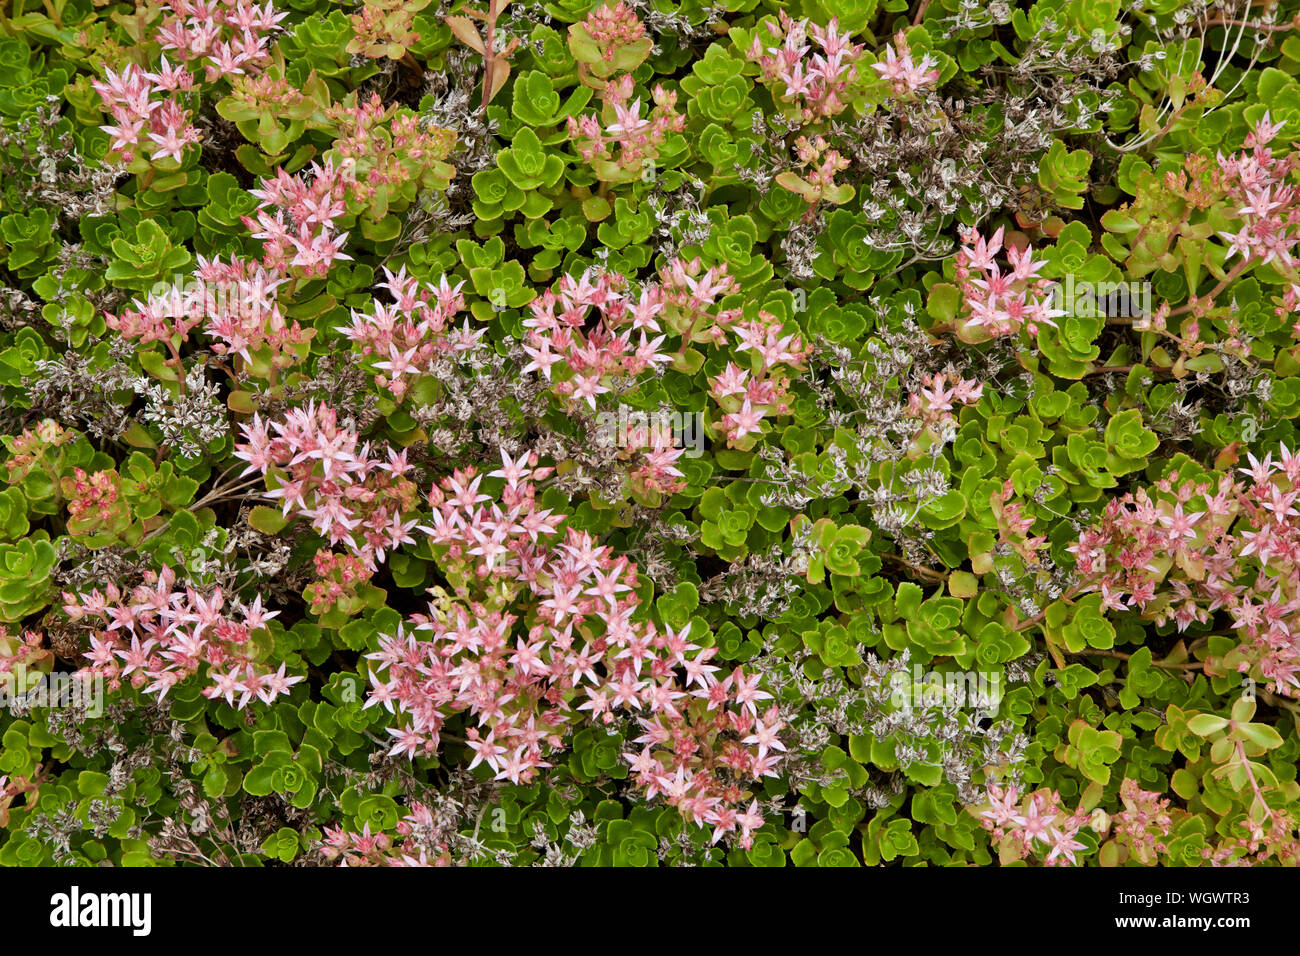 A top down view of Creeping Stonecrop sedum with pink flowers. Stock Photo